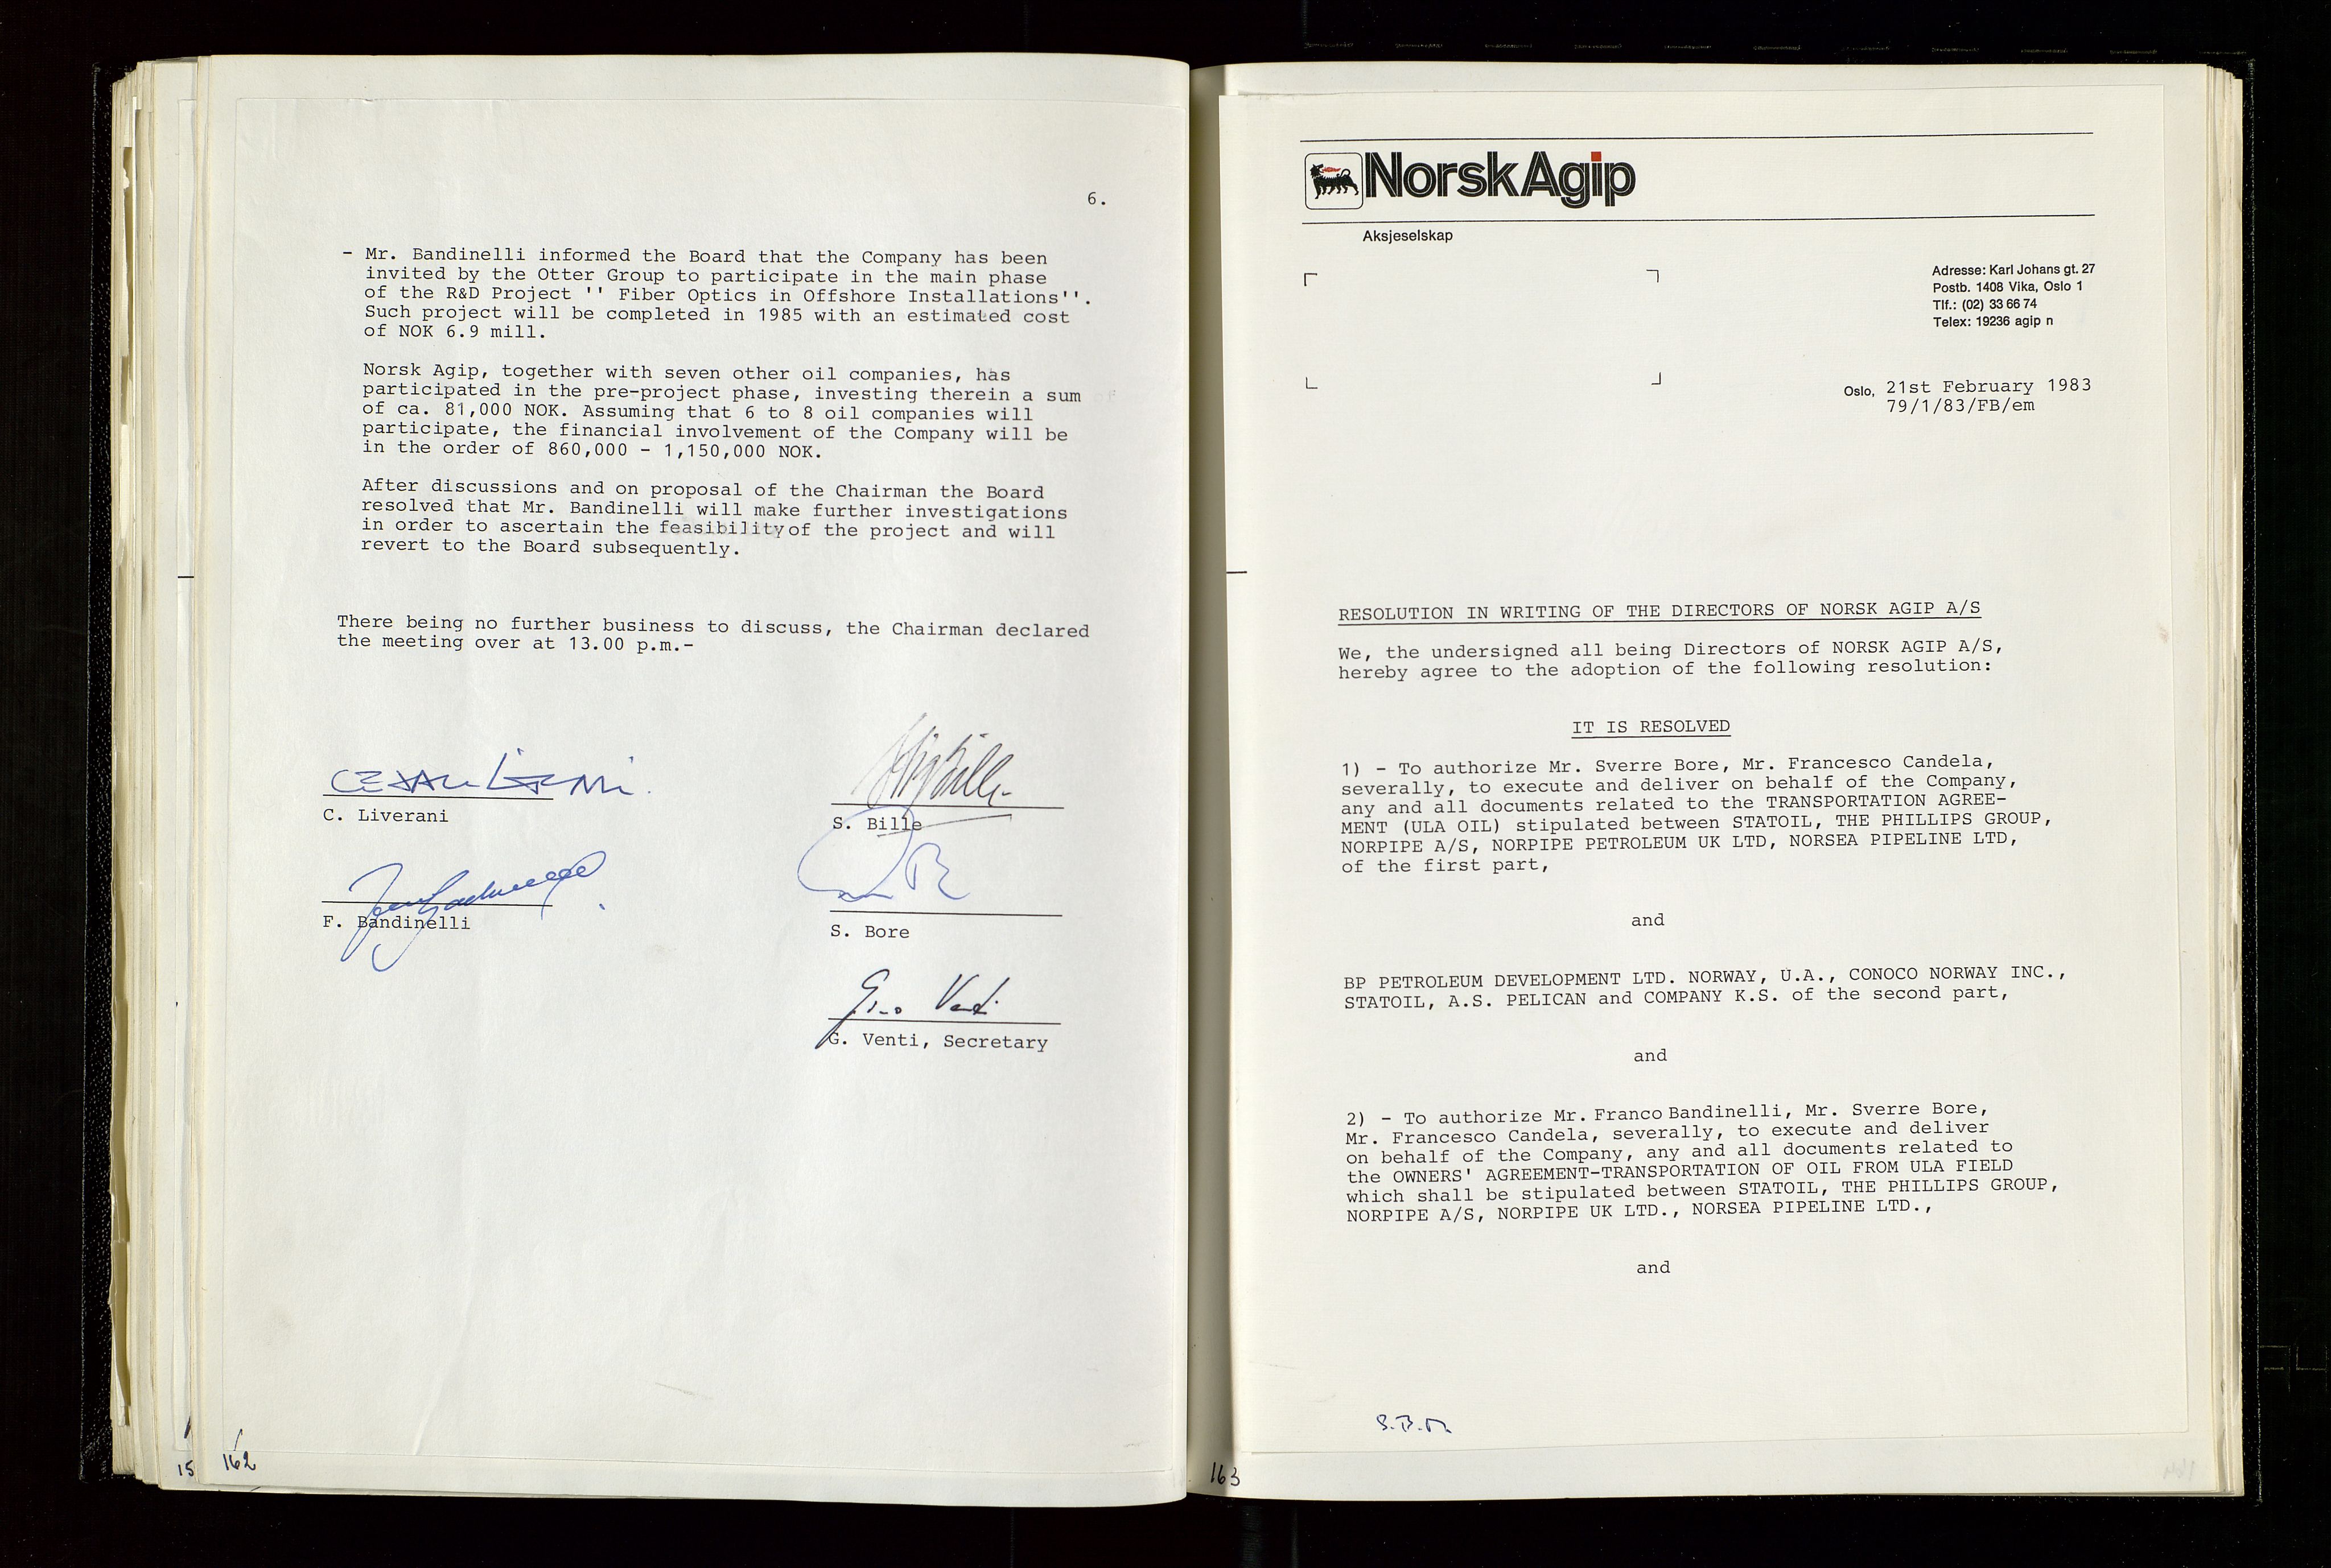 Pa 1583 - Norsk Agip AS, SAST/A-102138/A/Aa/L0003: Board of Directors meeting minutes, 1979-1983, s. 162-163